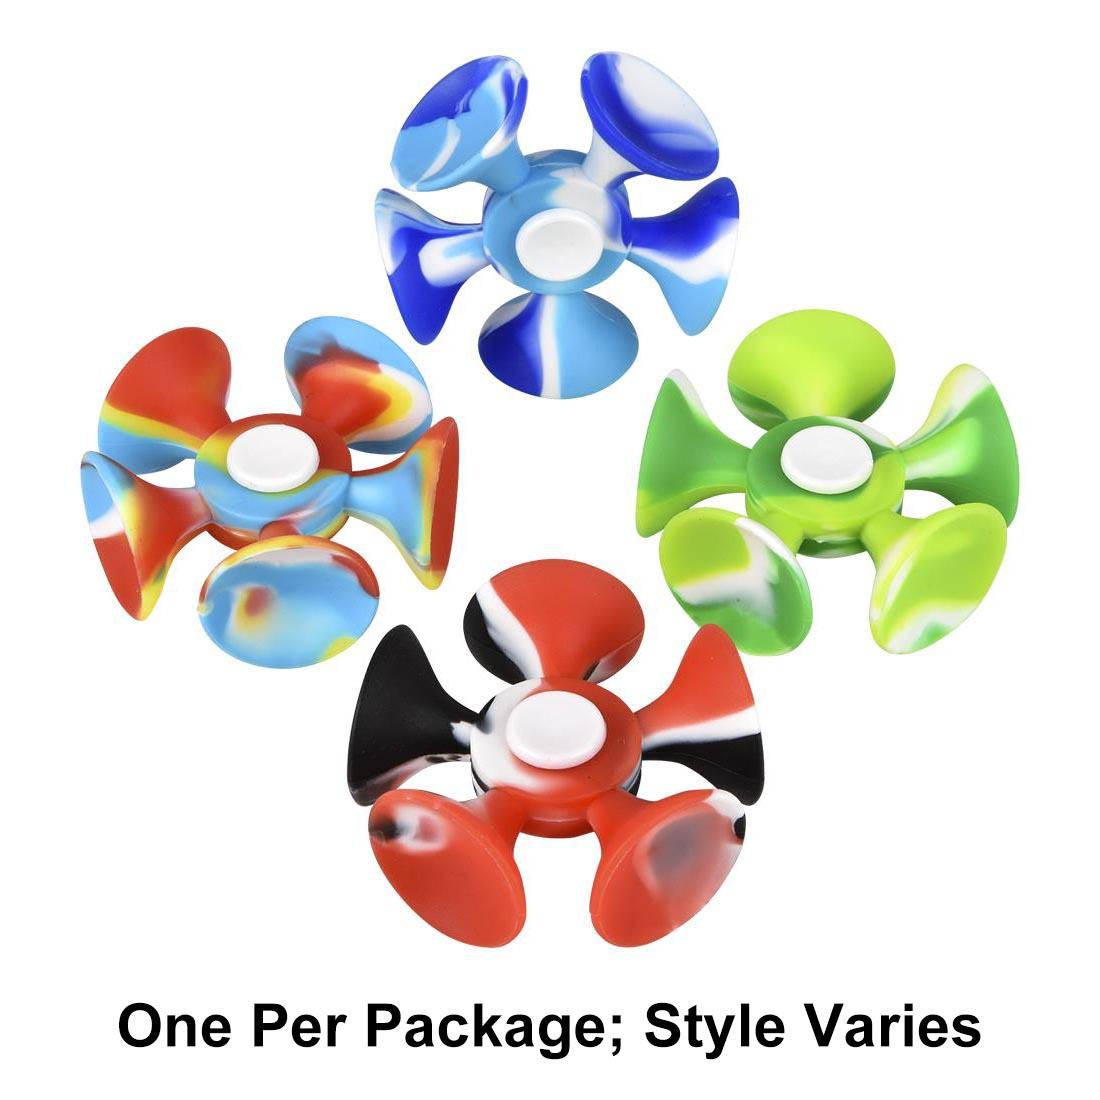 Four Suction Cup Fidget Spinners with text One Per Package; Style Varies